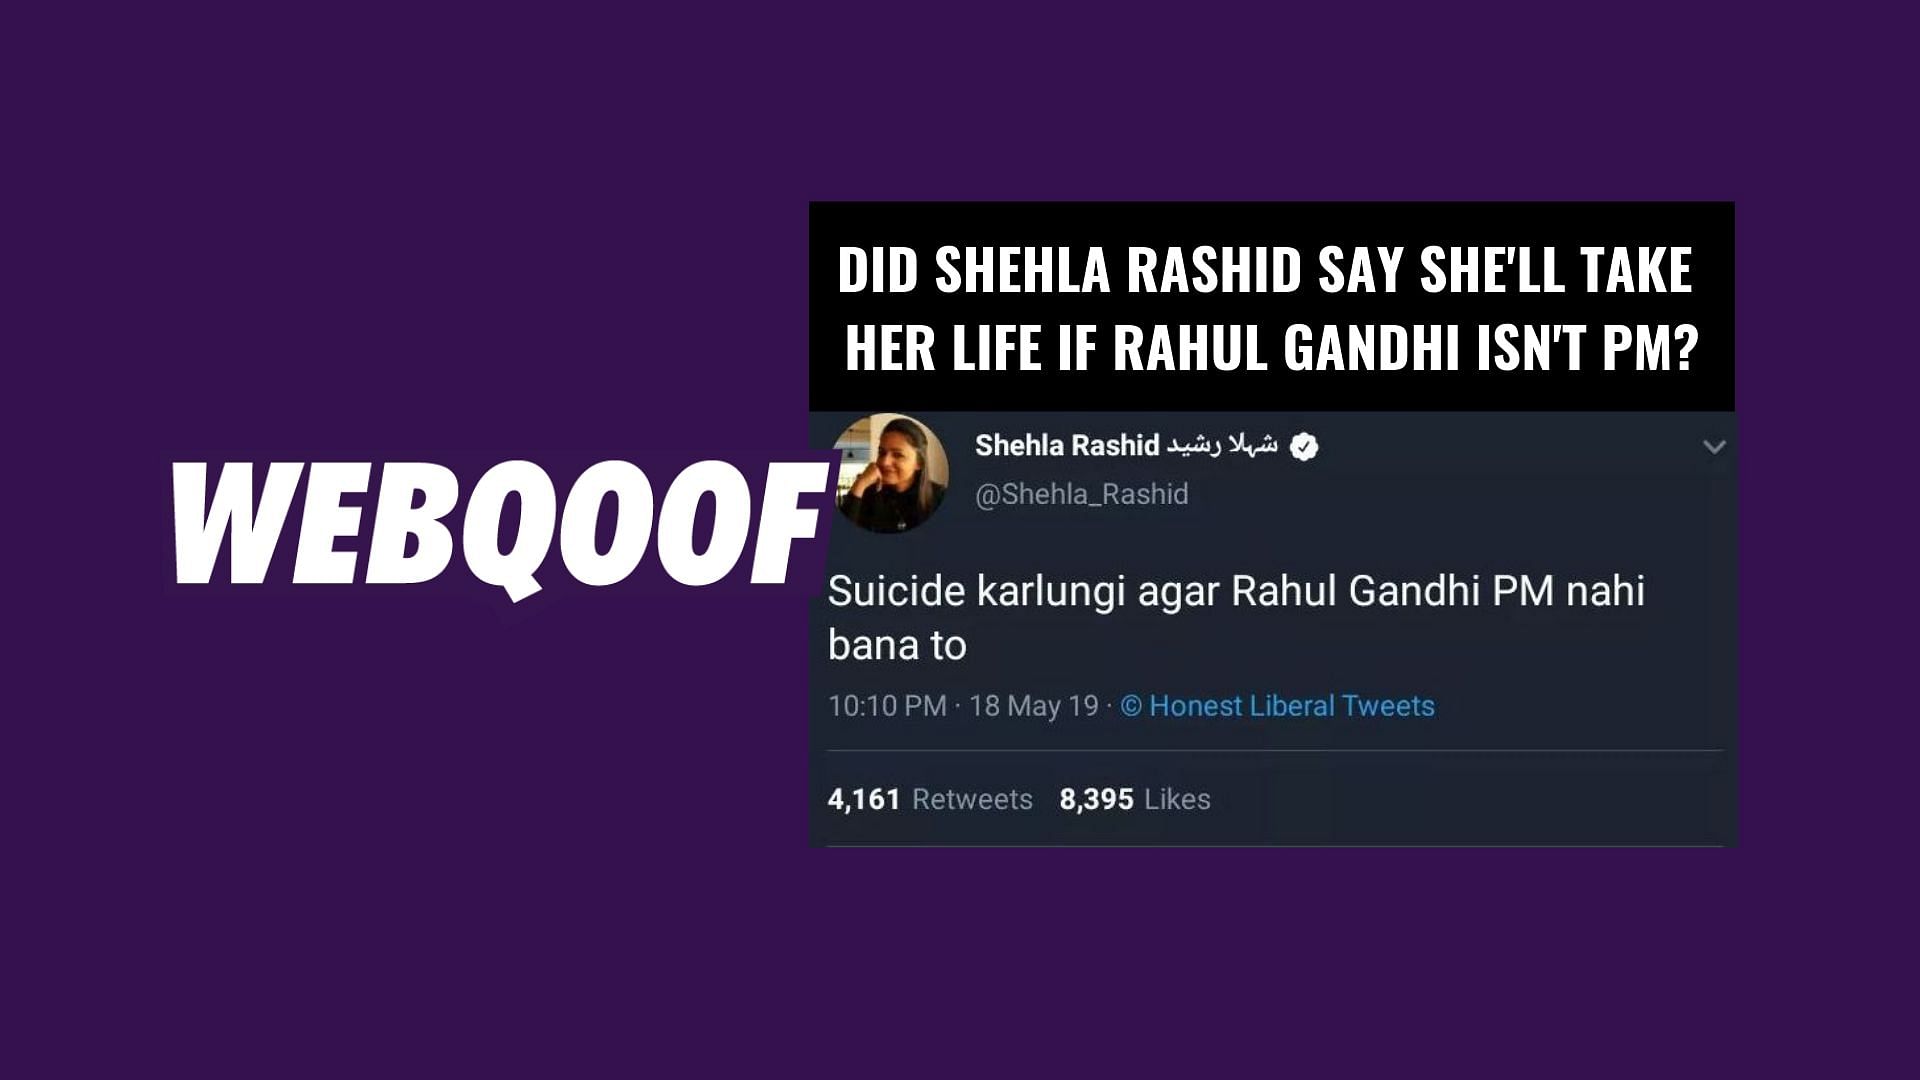 Shehla Rashid’s Viral Twitter Post Fact Check: The tweet has been morphed, and has been called out by Rashid herself.